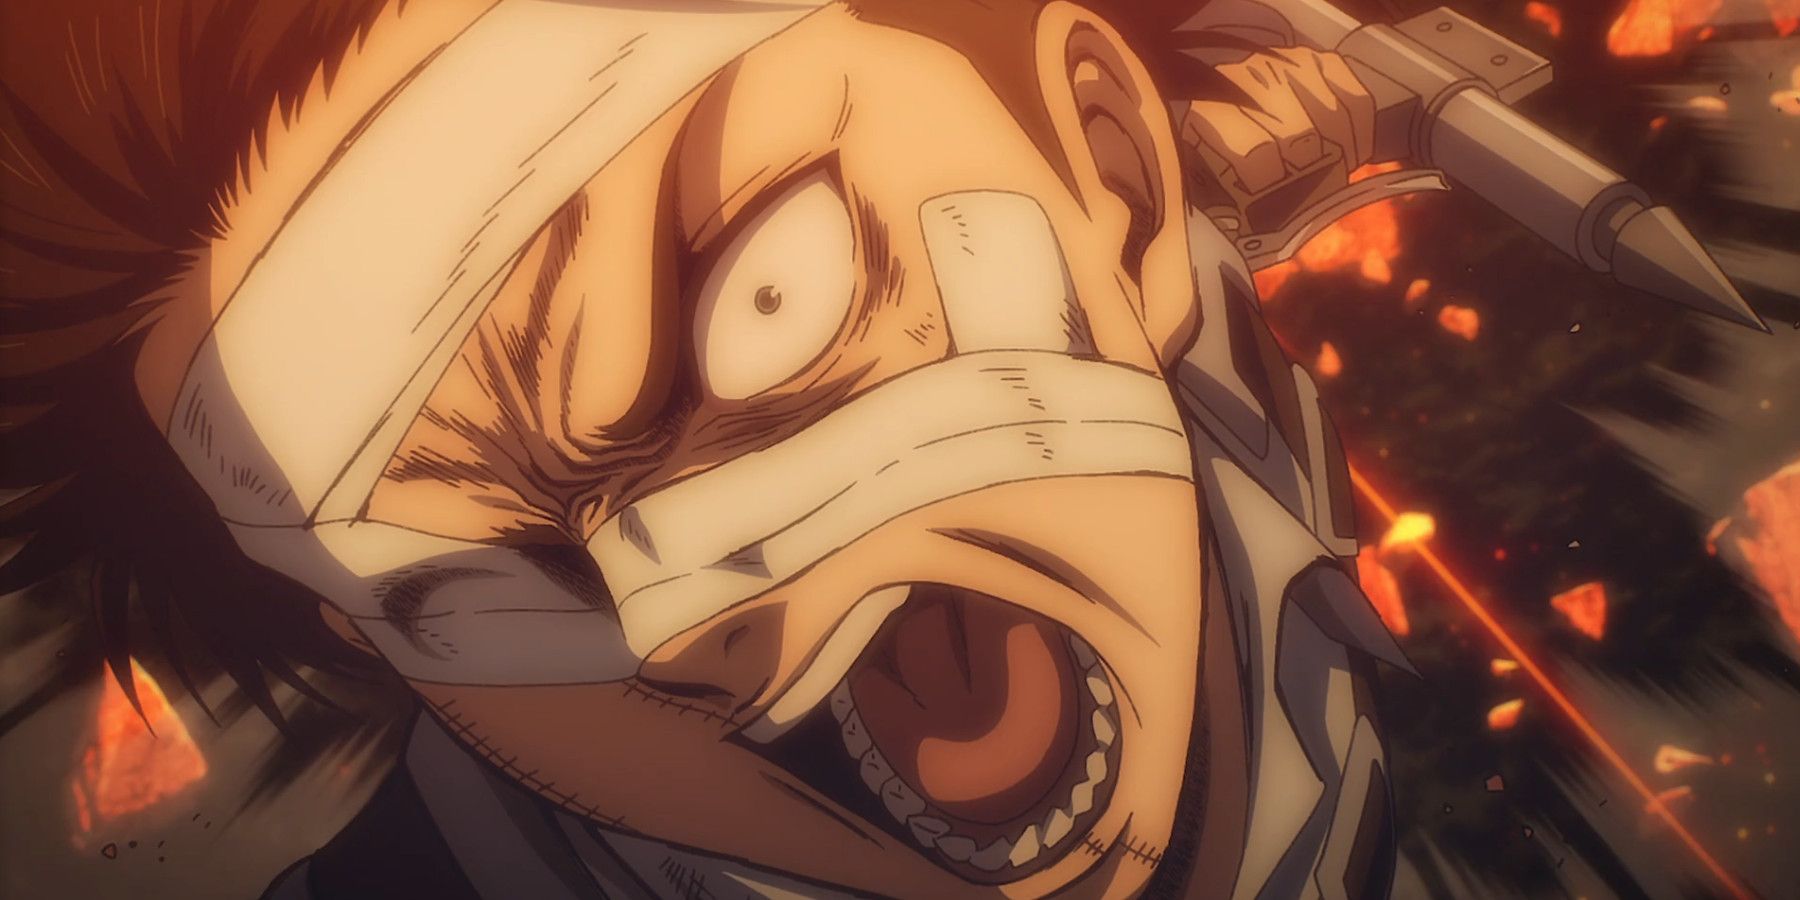 Review: 'Attack On Titan: The Final Chapters Part 2